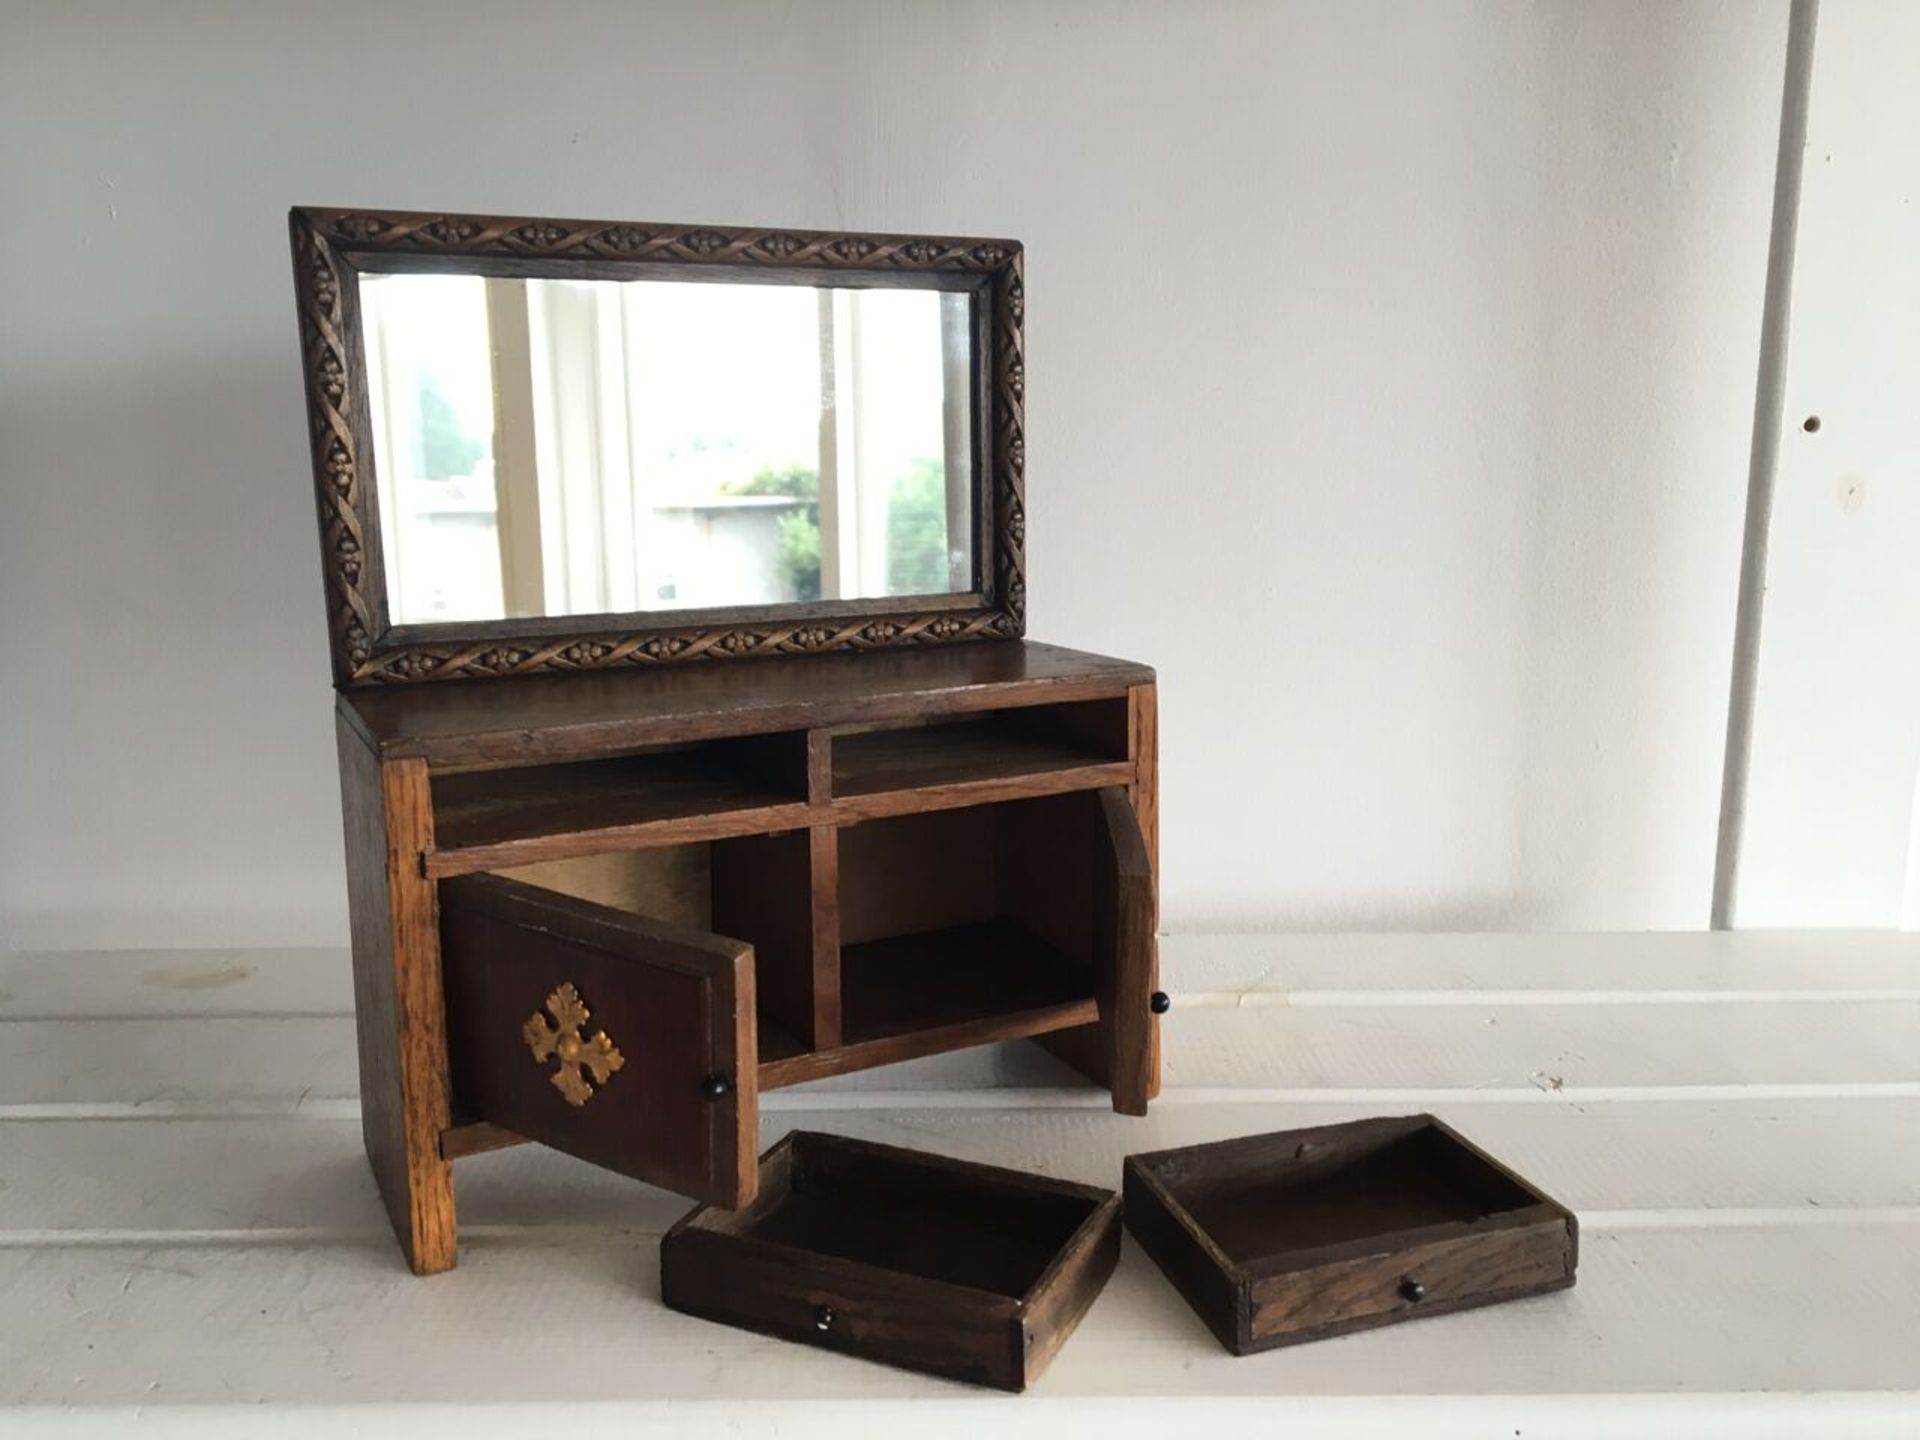 FANTASTIC ANTIQUE SMALL MODEL FURNITURE - APPRENTICE PIECE - A SIDEBOARD WITH MIRROR, DRAWERS, - Bild 3 aus 5